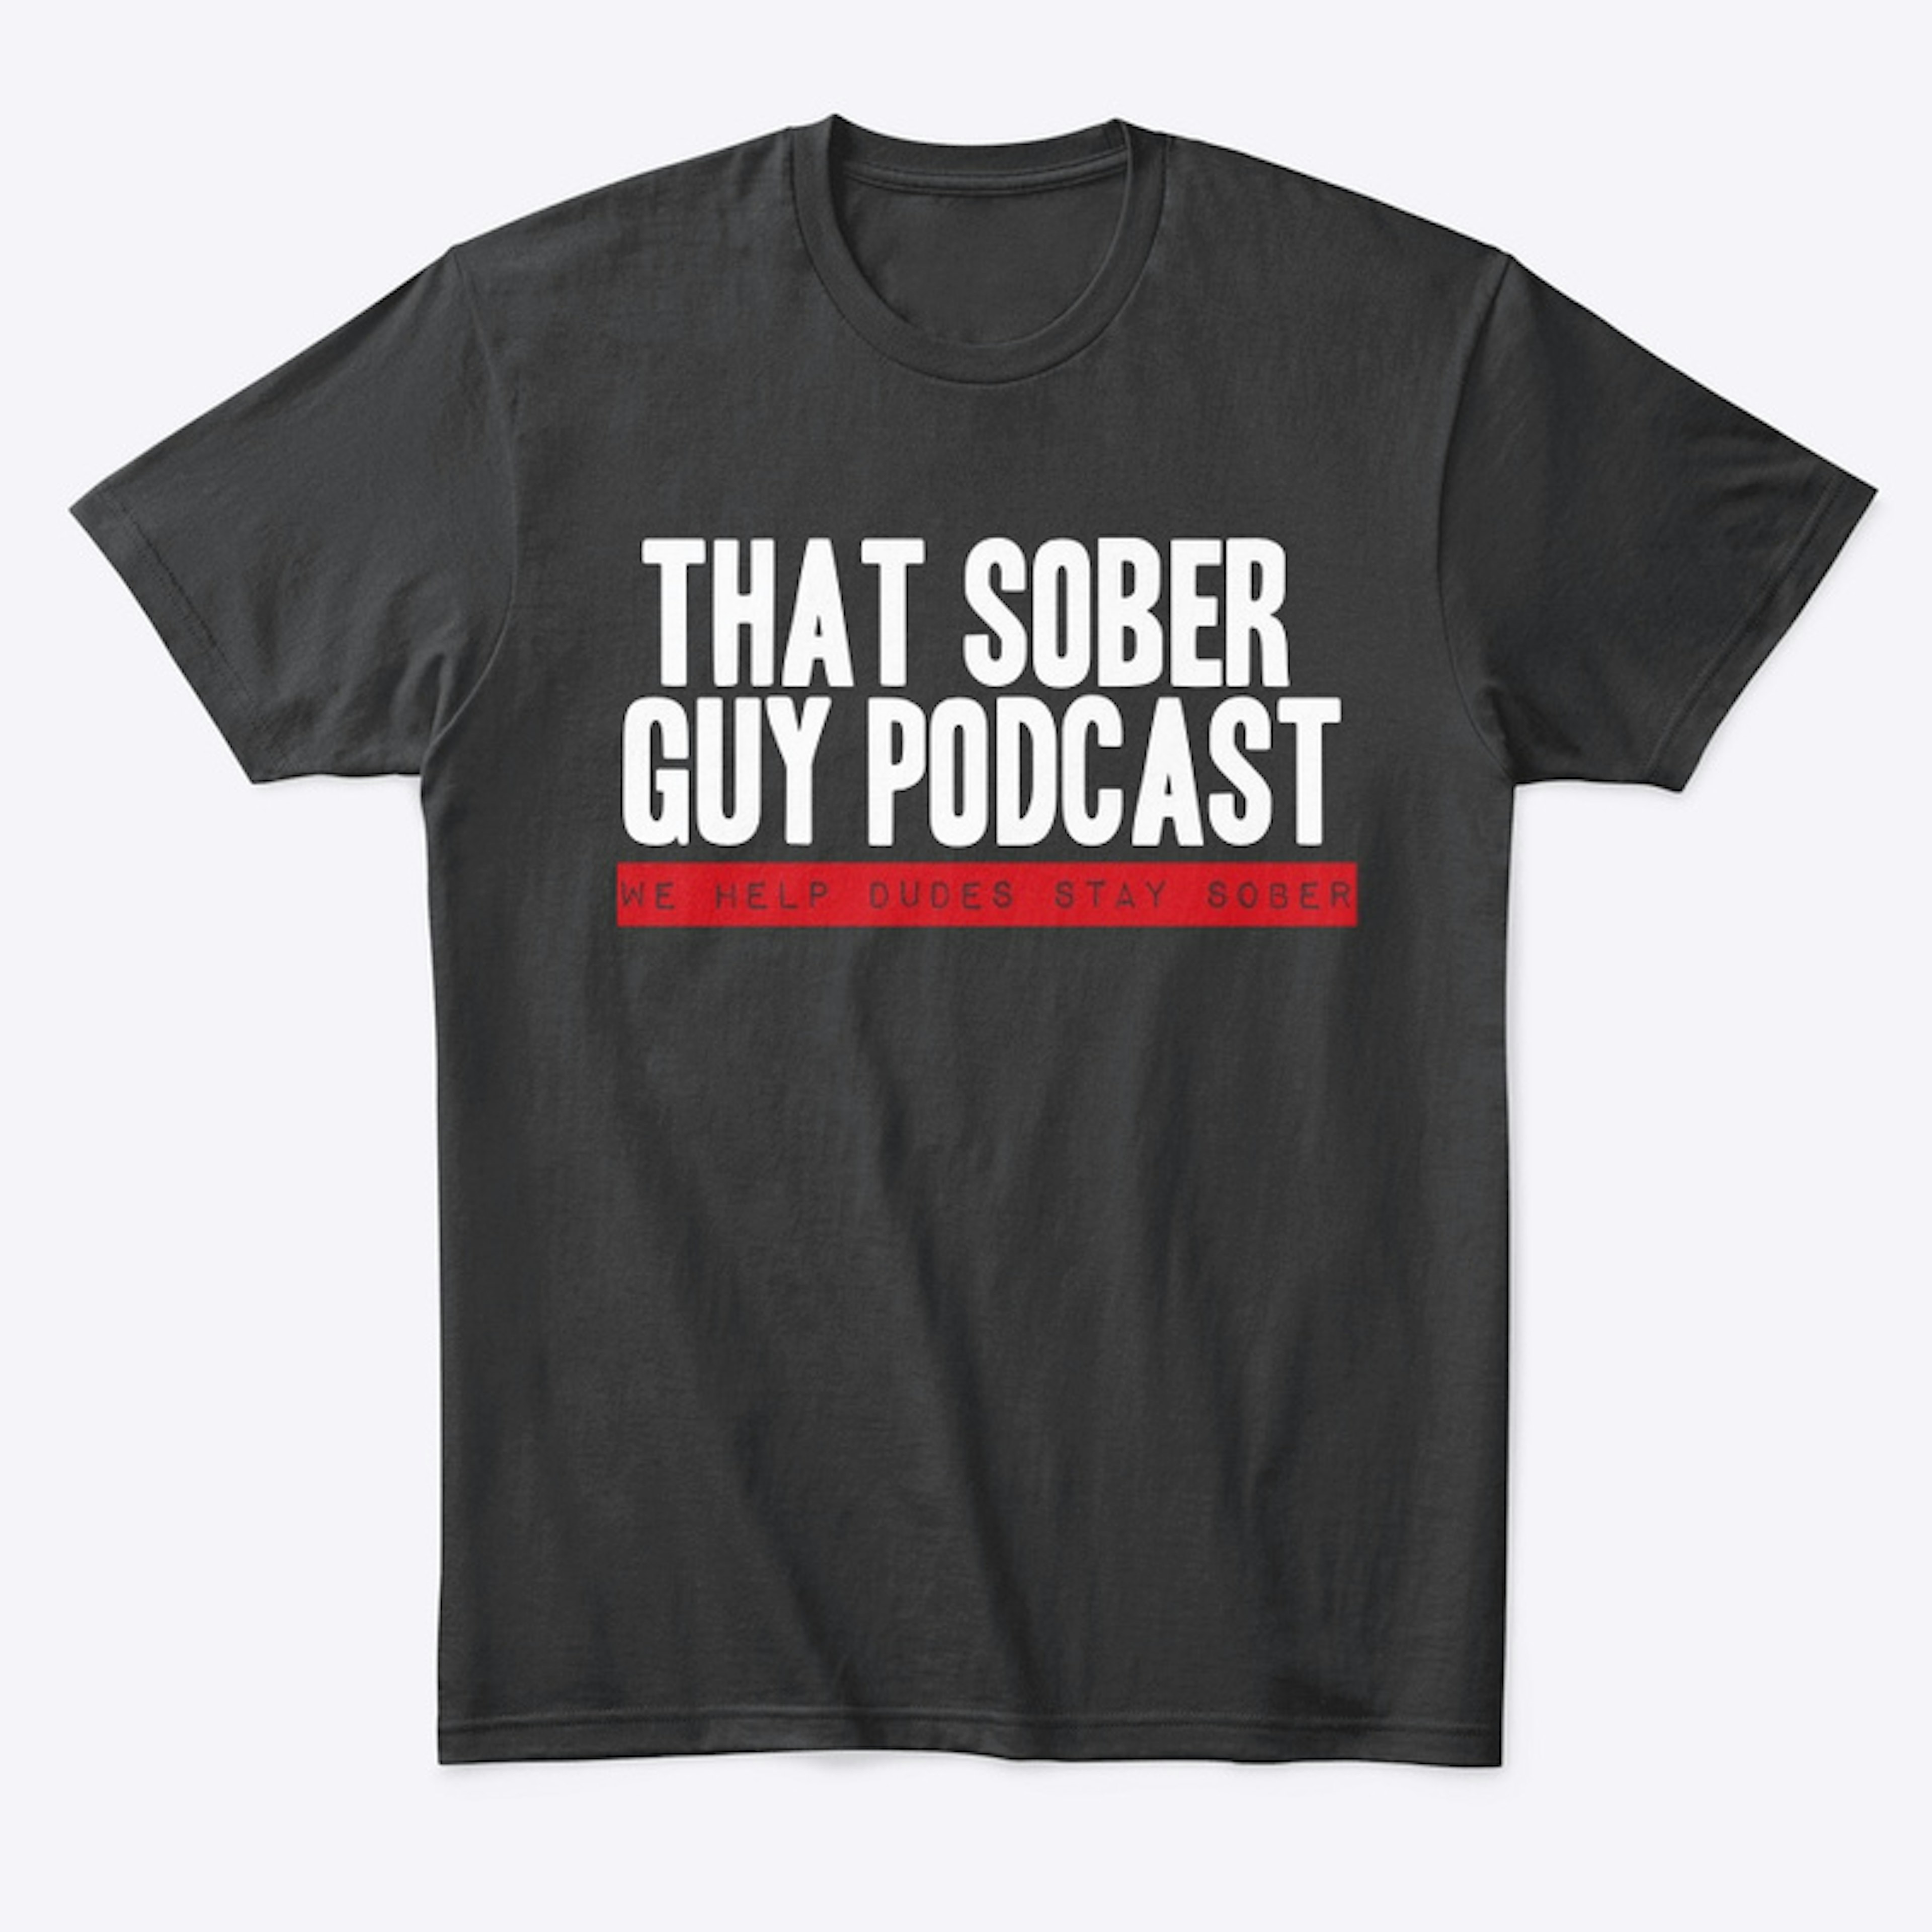 That Sober Guy Podcast Tee